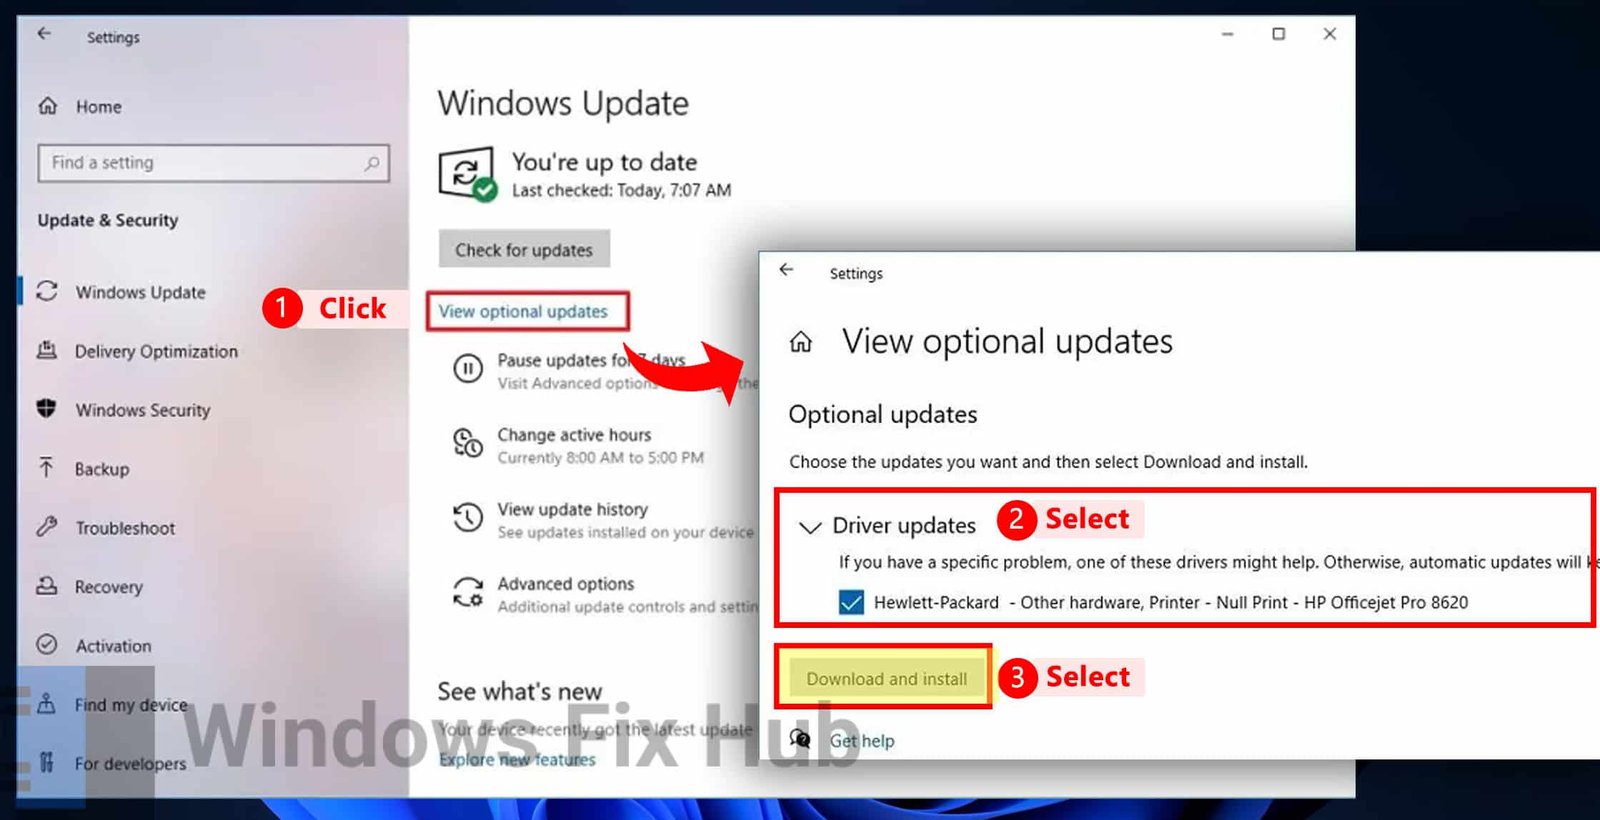 View optional updates then Driver updates